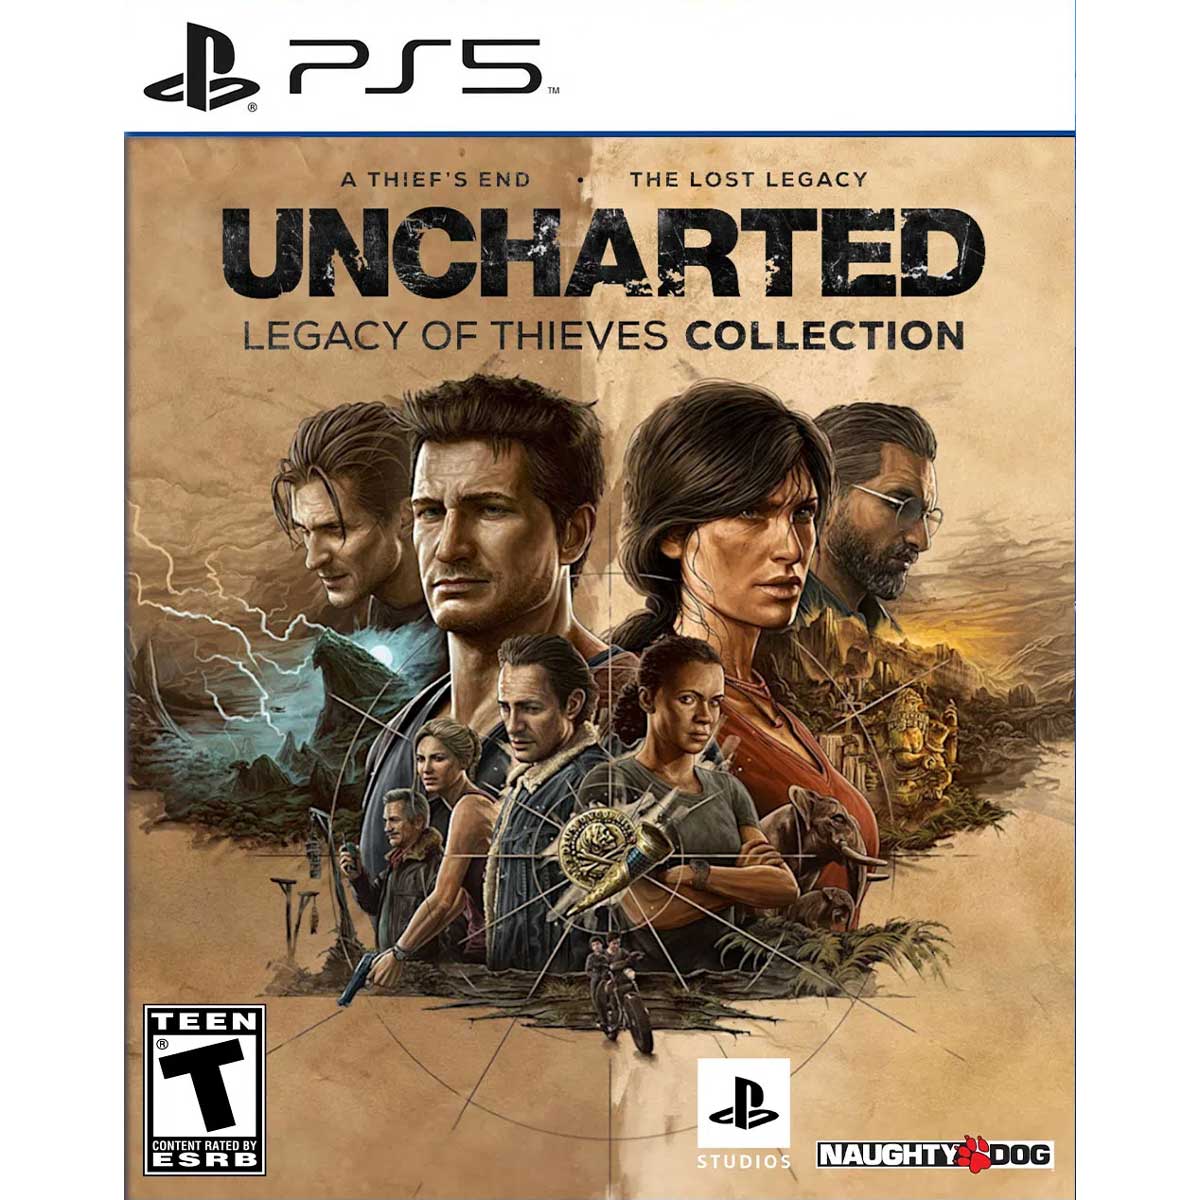 Uncharted 4 ps5. Uncharted Legacy of Thieves collection ps5. Uncharted™: наследие воров. Коллекция. Uncharted 5 ps5. Uncharted thieves collection купить